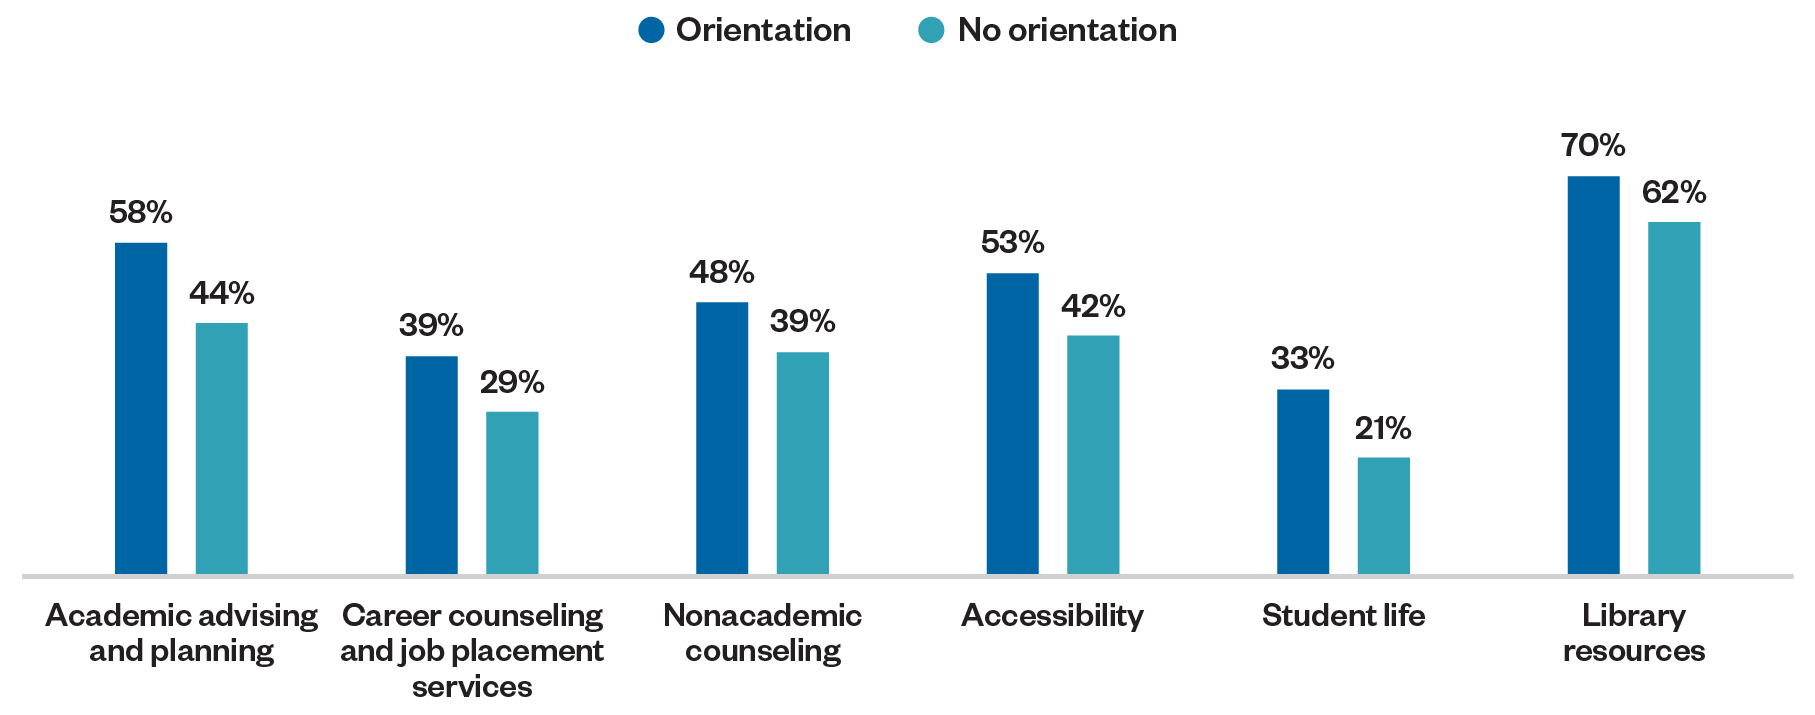 A bar graph indicating the percentage of faculty who did and did not participate in orientation and reported feeling knowledgeable in the following areas: academic advising and planning, career counseling and job placement services, nonacdemic counseling, accessibility, student life, and library resources.